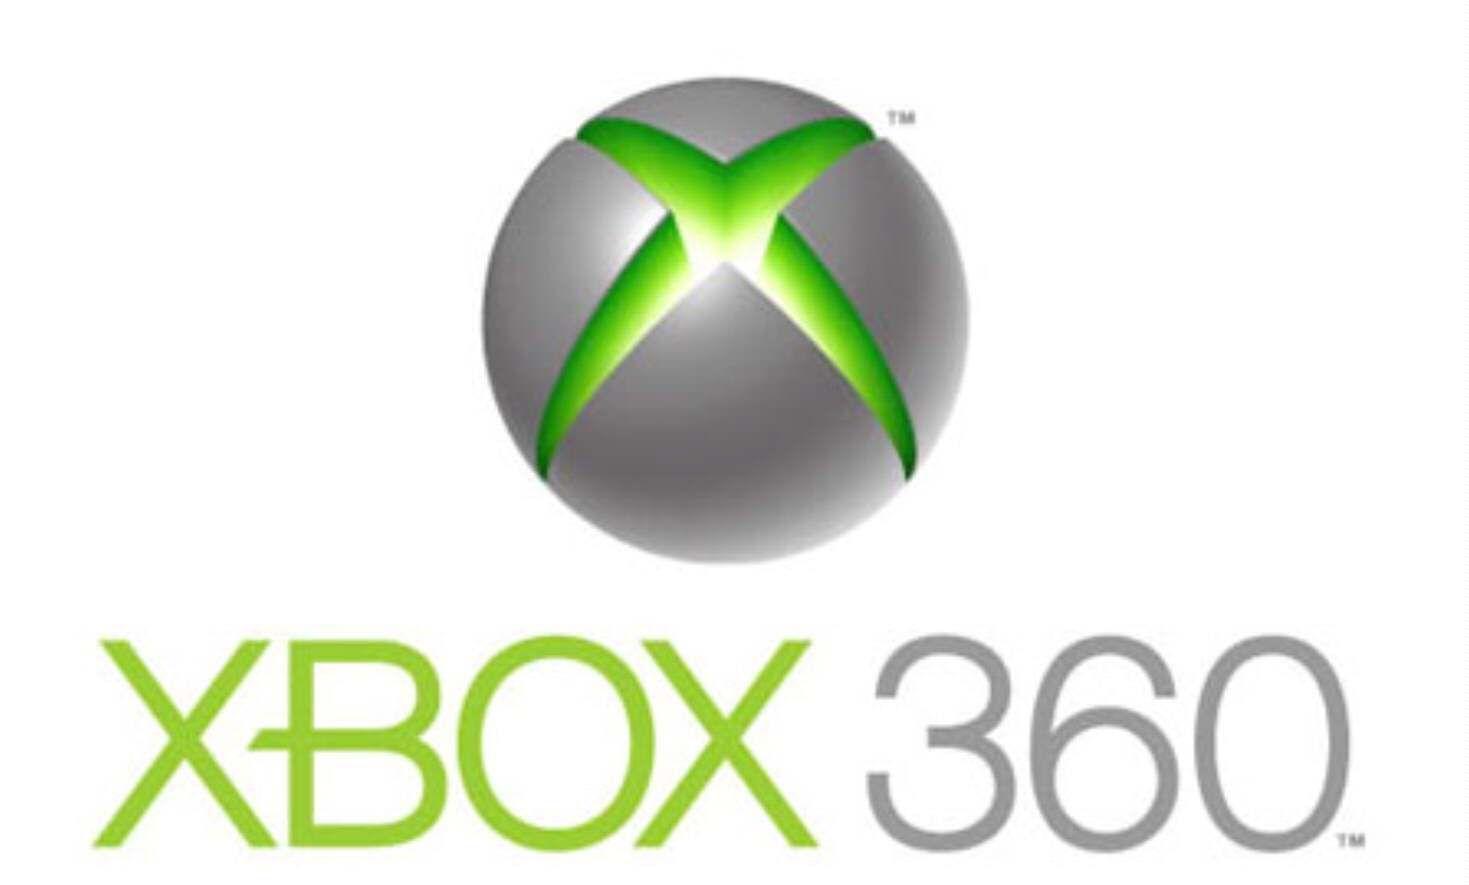 New Xbox Logo - The xbox 360 logo was an improvement upon the old xbox logo for a ...